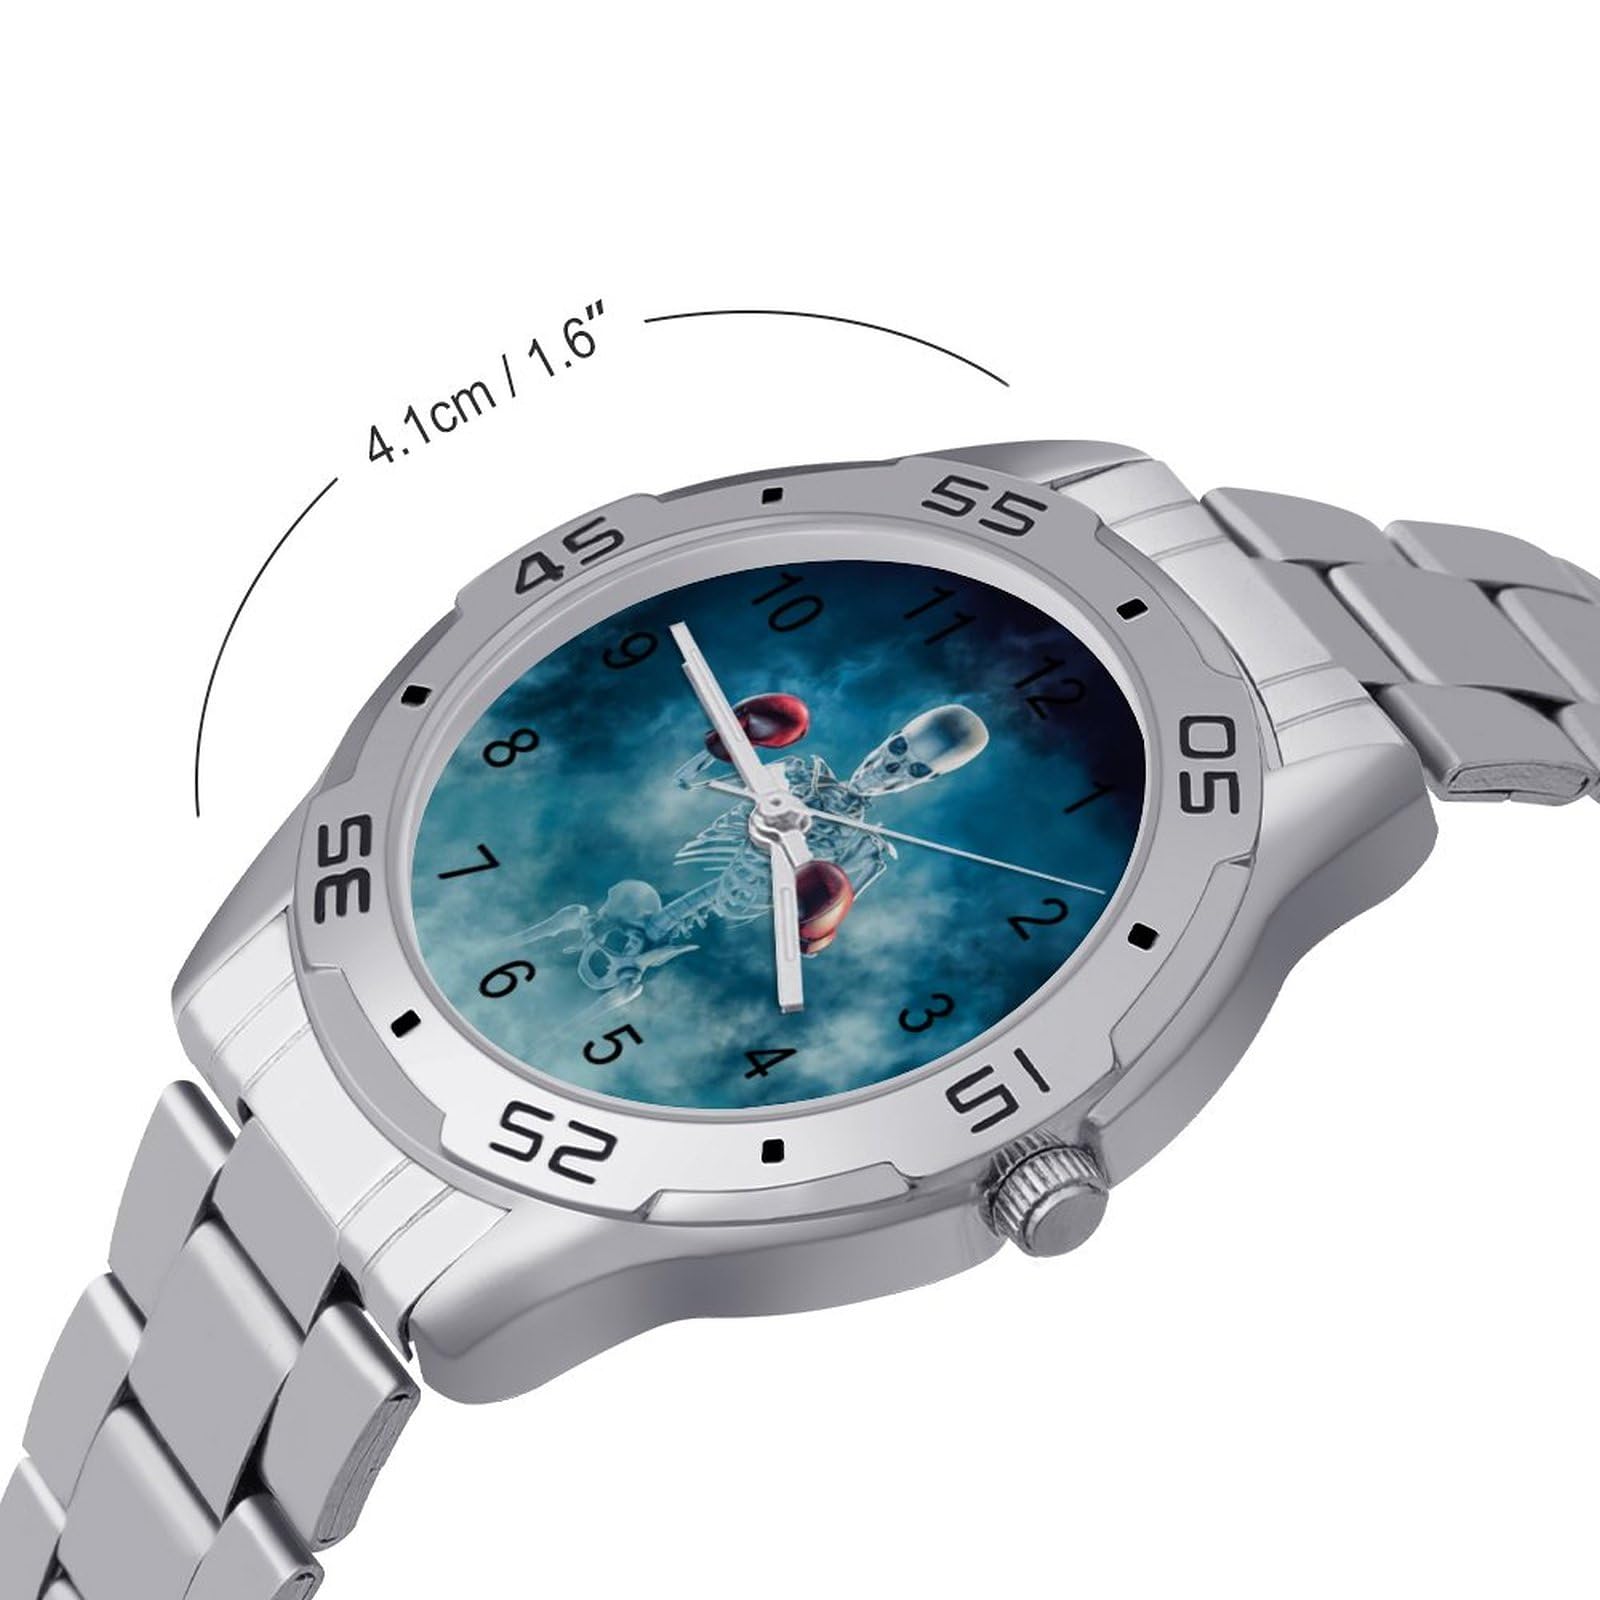 Scary Fighter Skeleton Wearing Boxing Gloves Stainless Steel Band Business Watch Dress Wrist Unique Luxury Work Casual Waterproof Watches